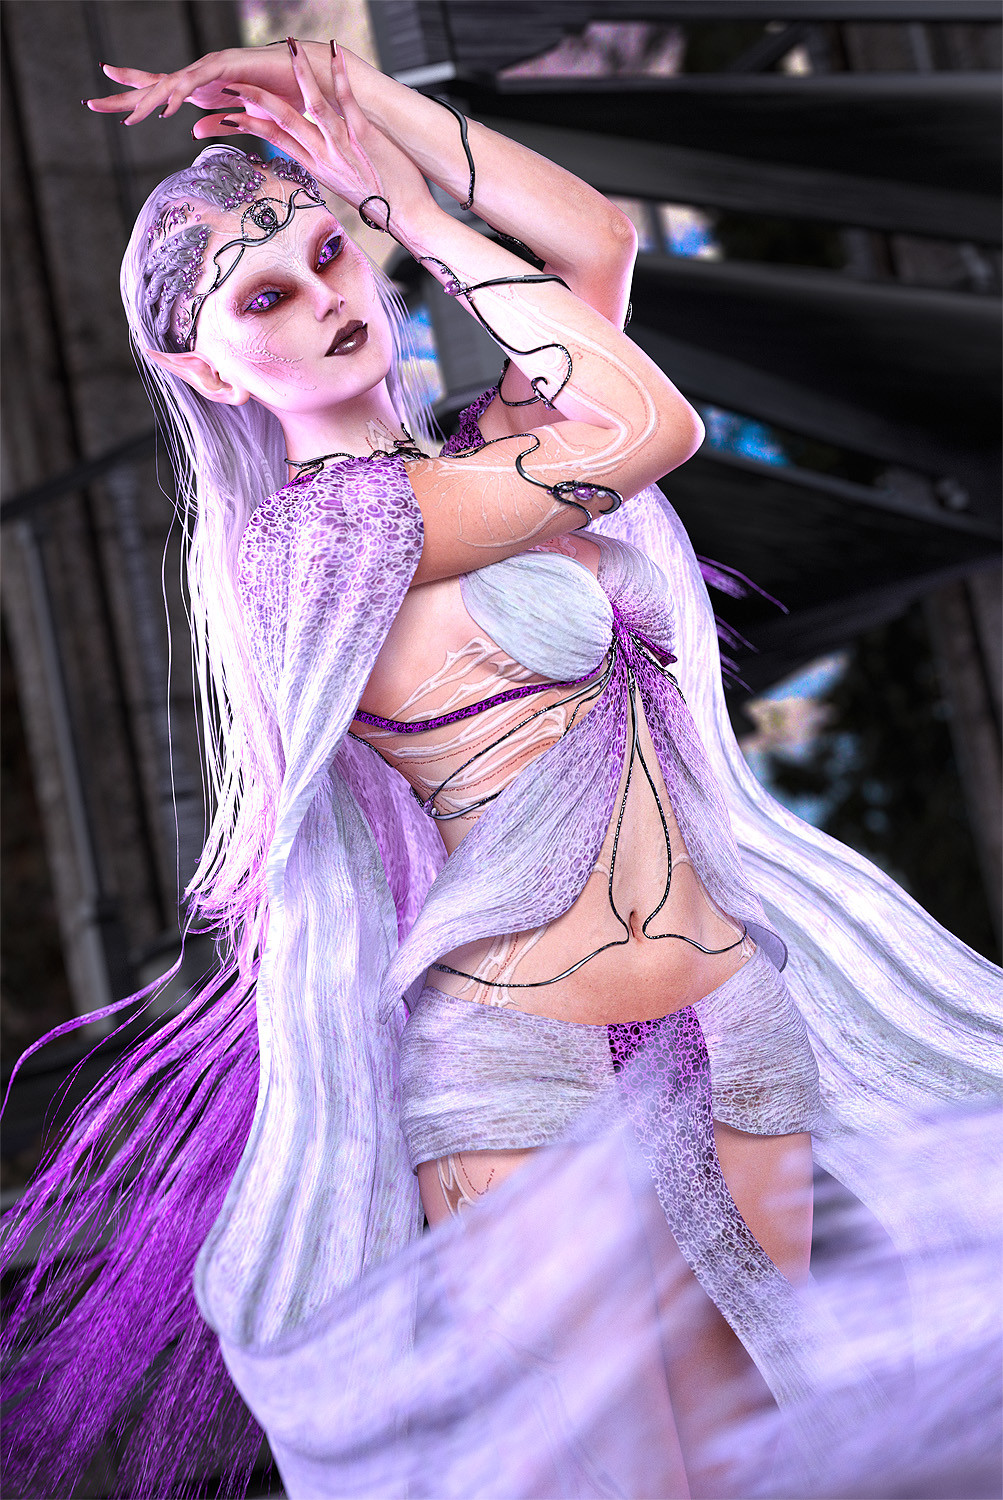 "Airdancer"
Another artistic render/promo for my FireBride outfit.
Nothing special, but pretty :)